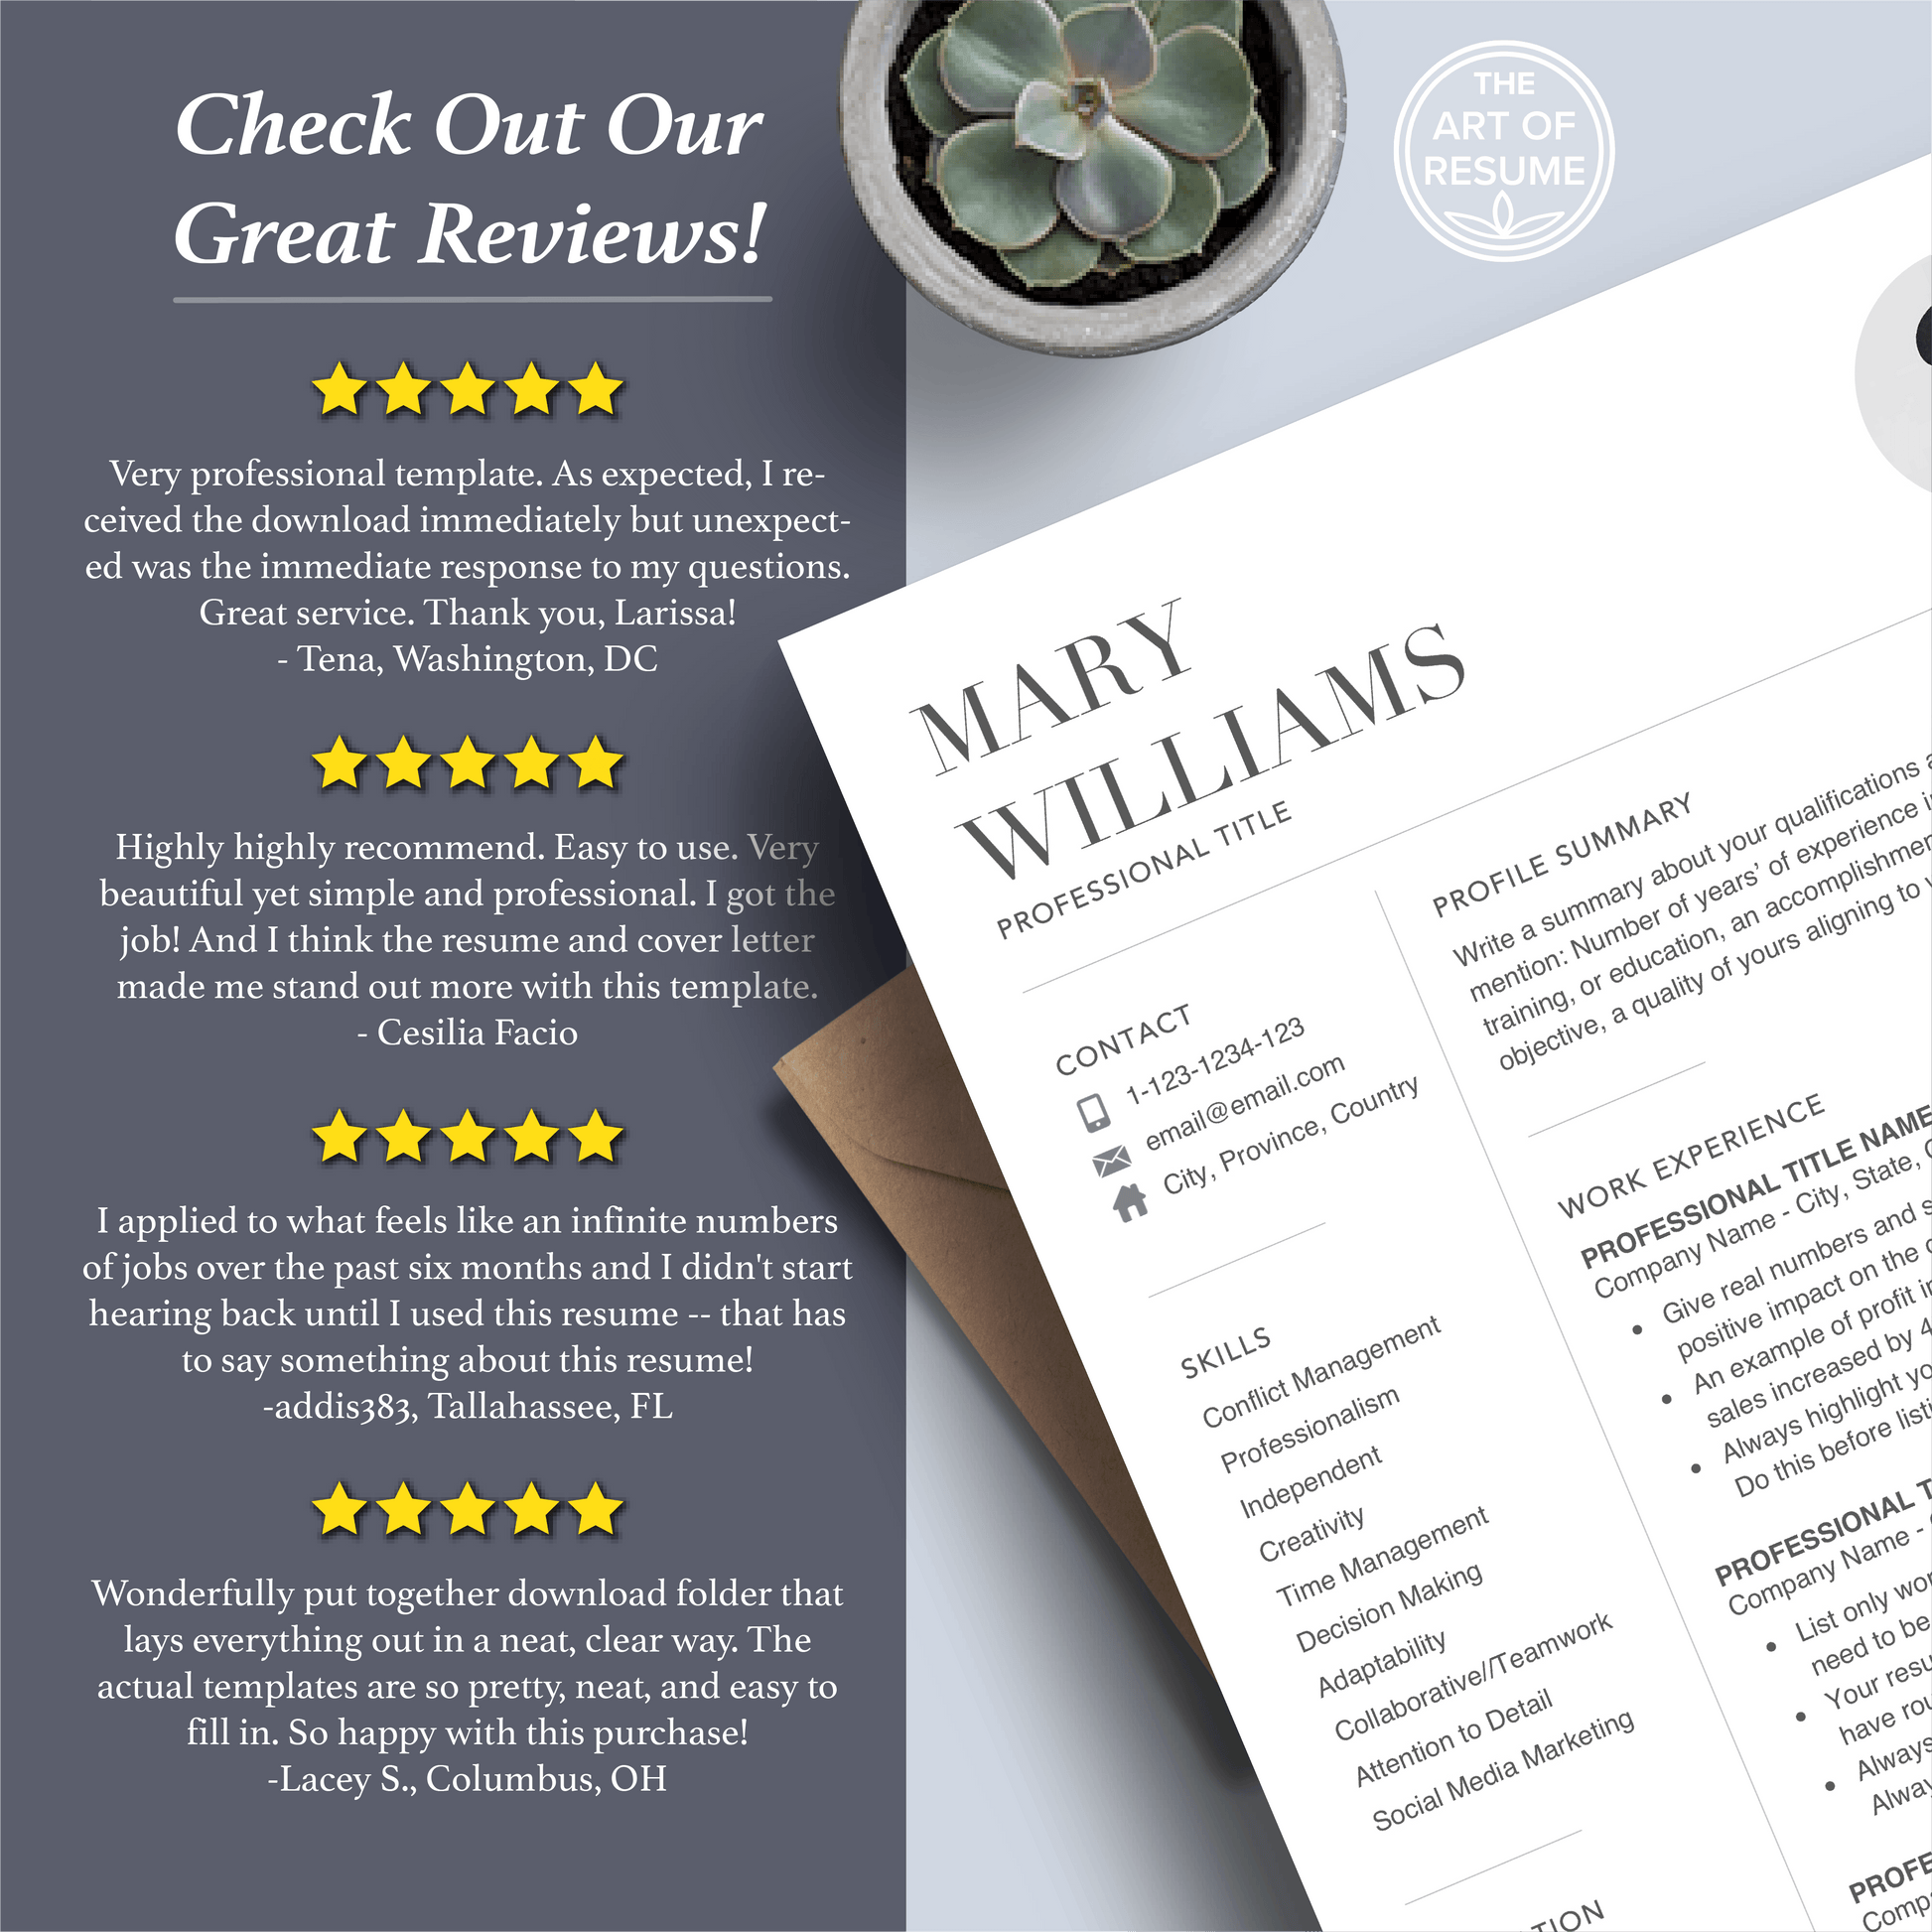 Simple Resume with Photo | Modern Resume Design | Professional Resumes - The Art of Resume